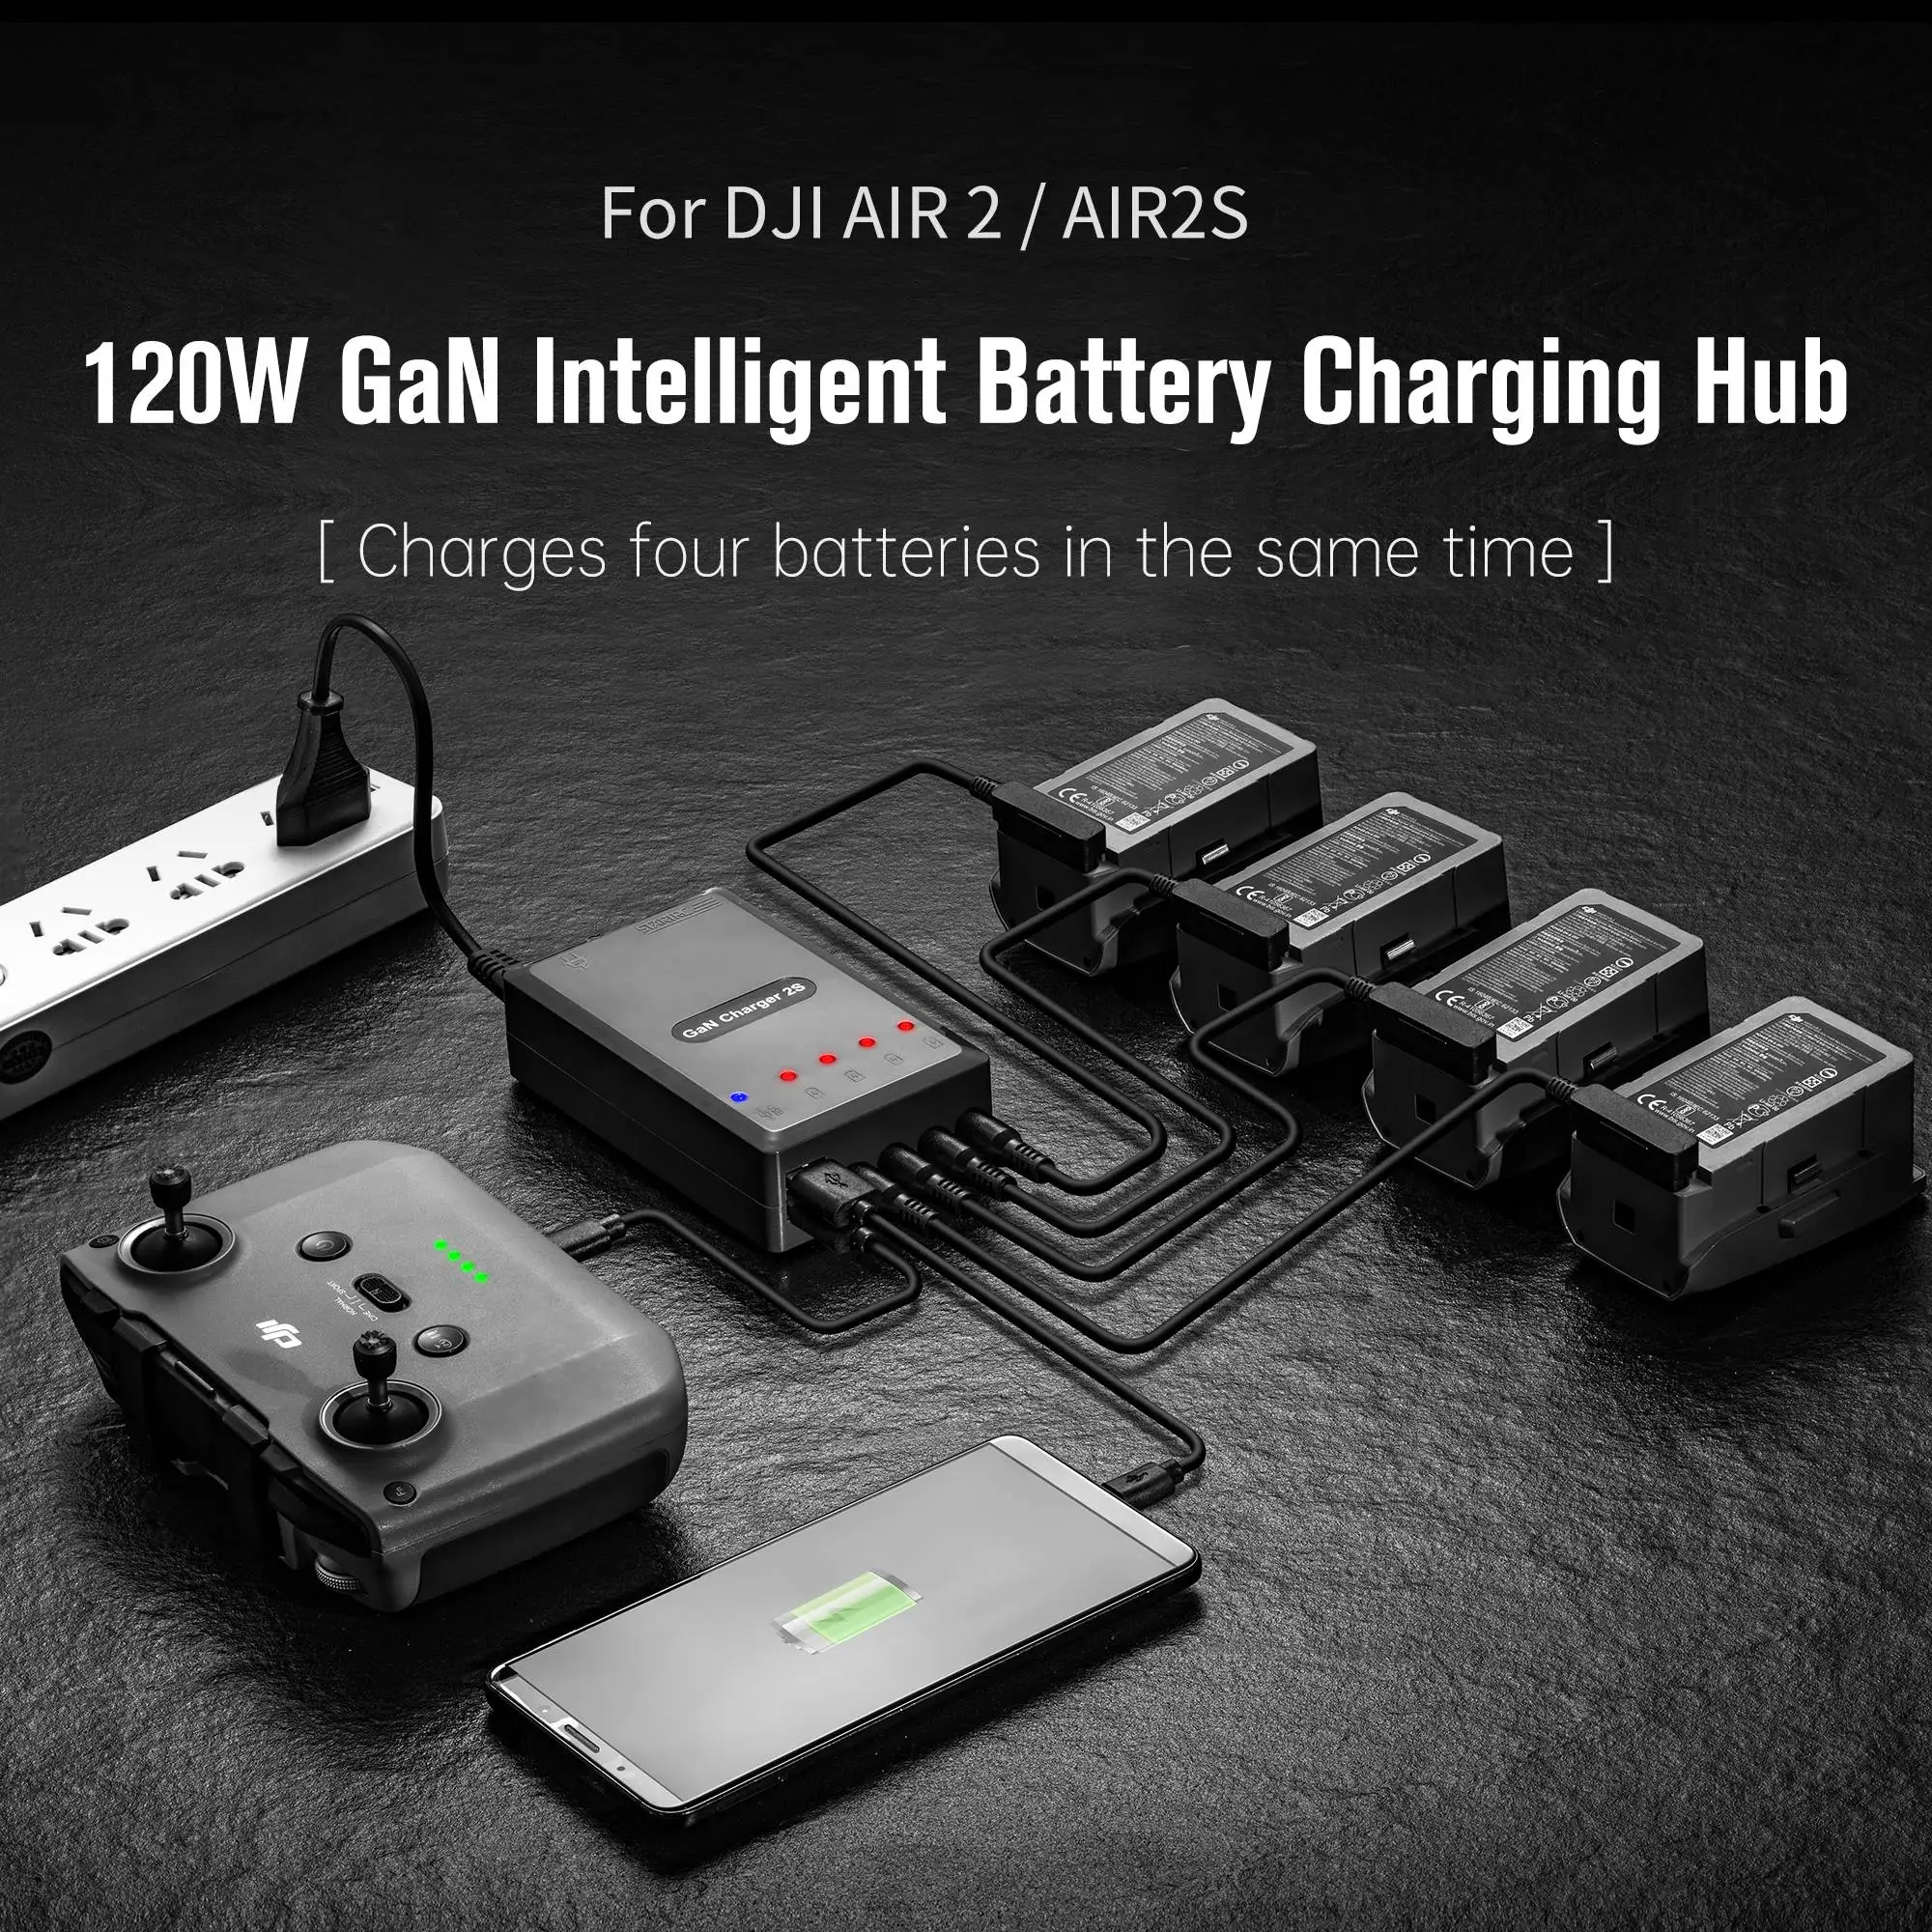 

6 in 1 Intelligent Fast Charging Hub 120W GaN Multi Battery Charger for DJI Air 2s / Mavic Air 2 Drone Battery Remote Control EU